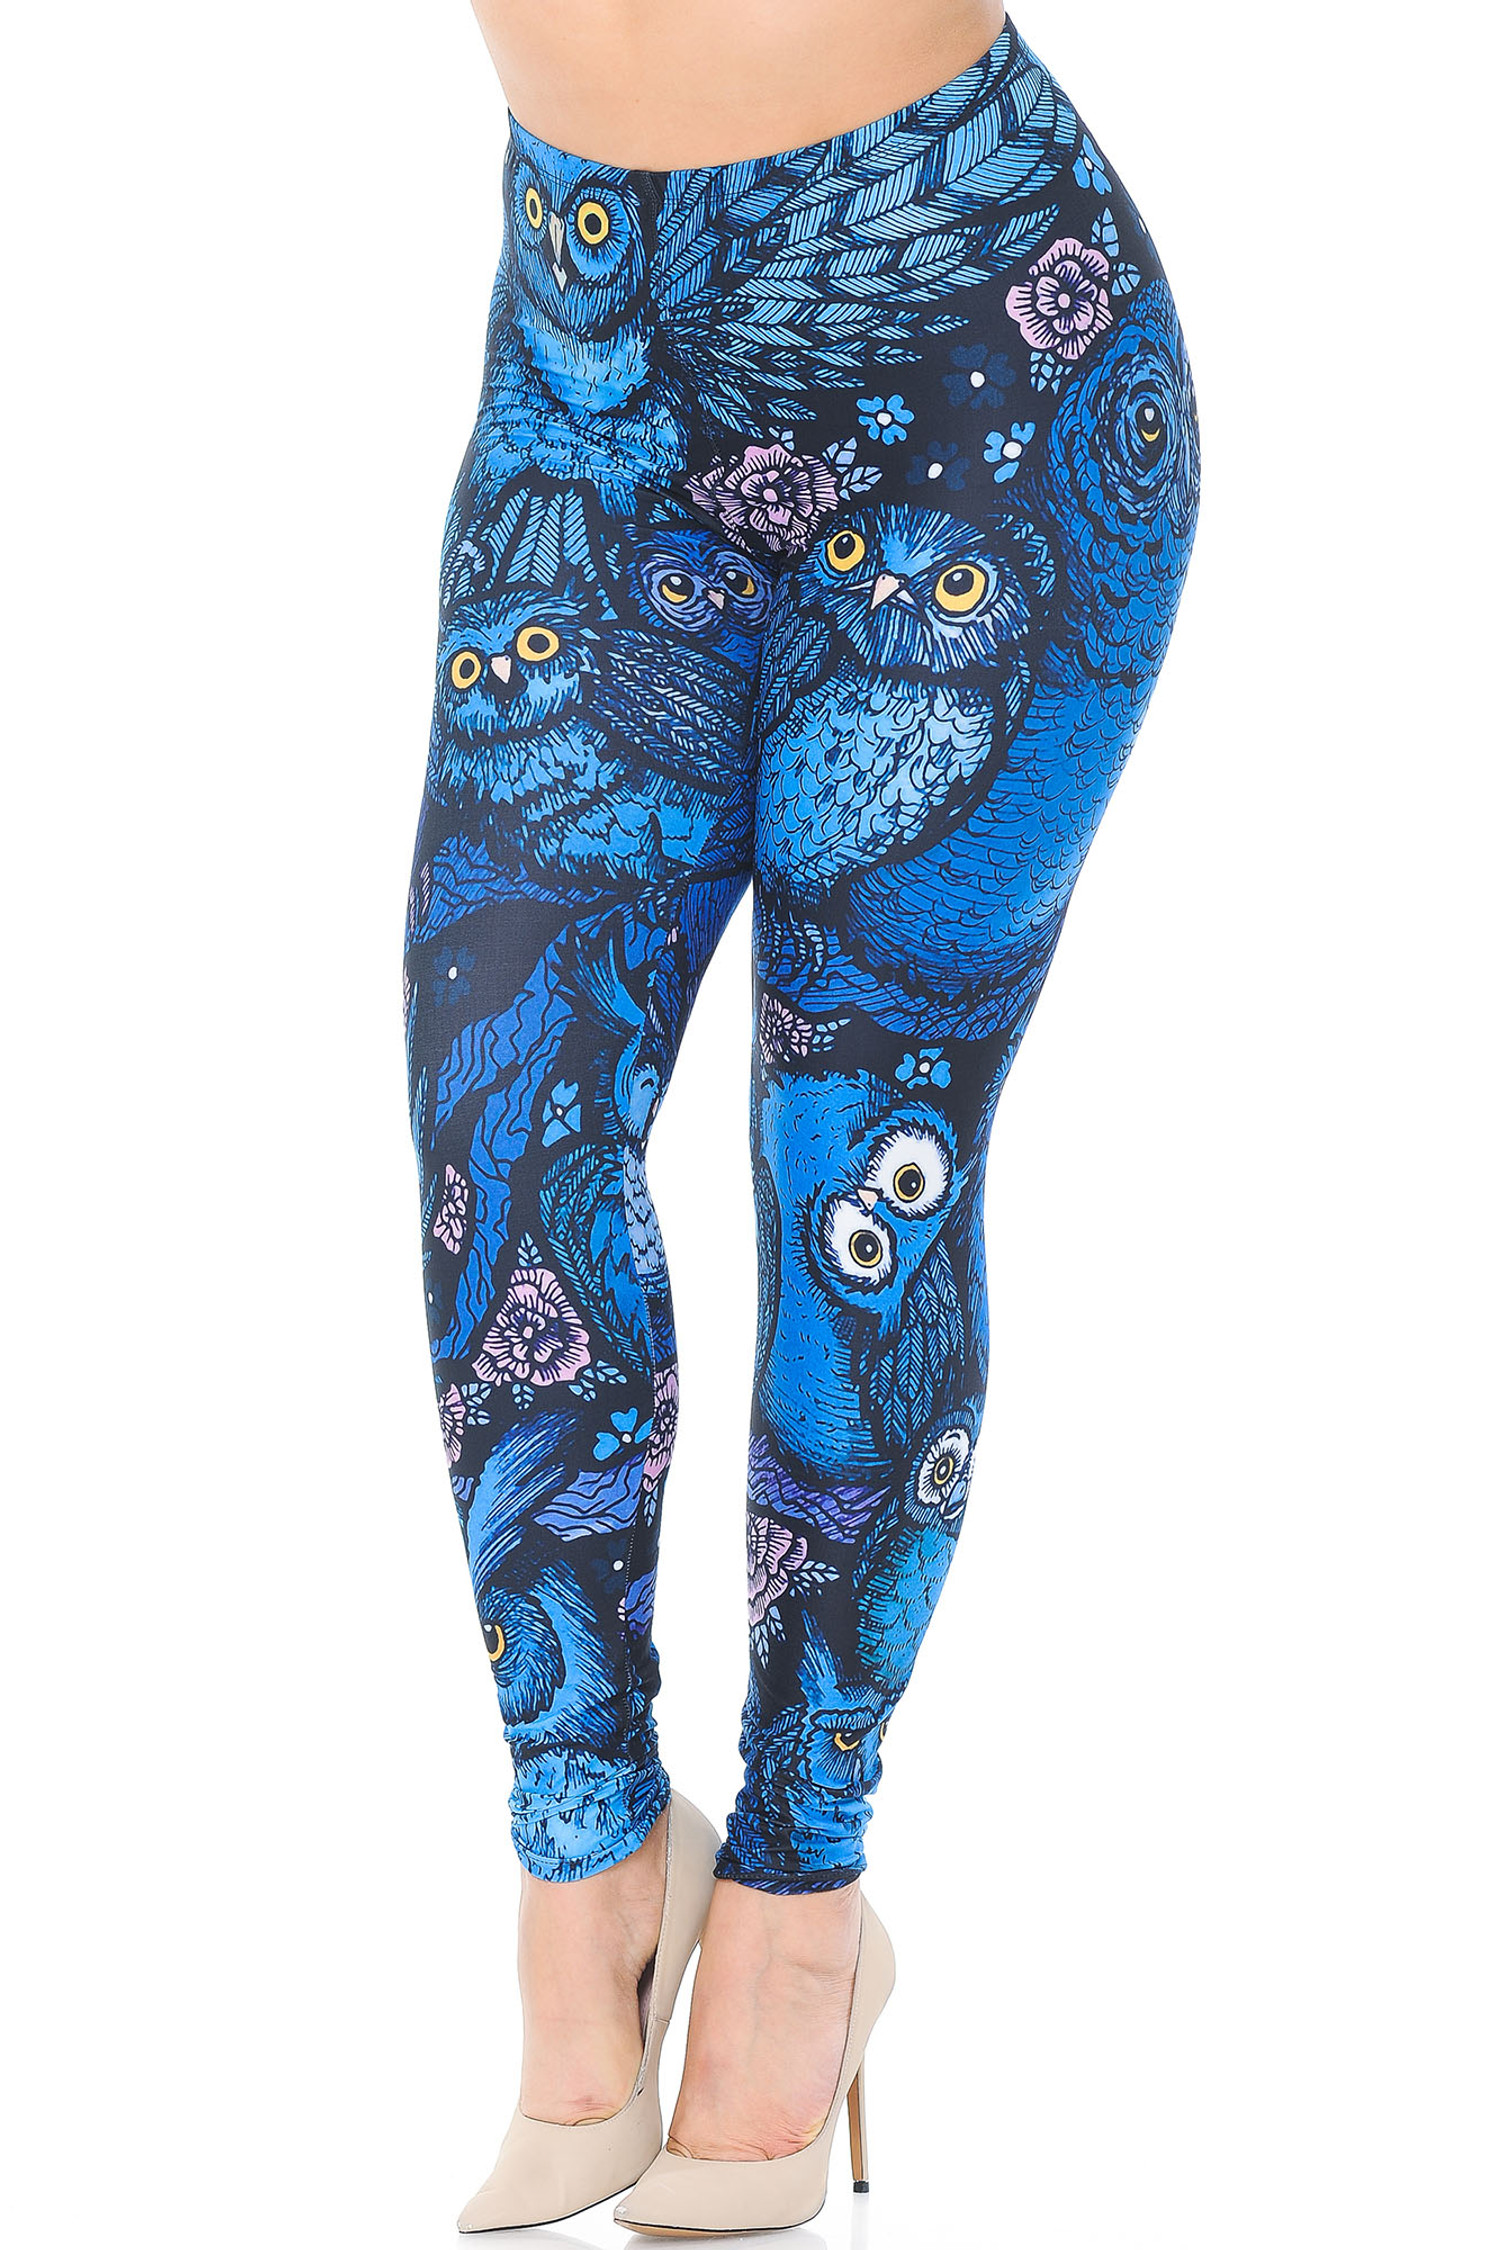 LUOUSE Multipack Cute Printed Girls Stretch Leggings India | Ubuy